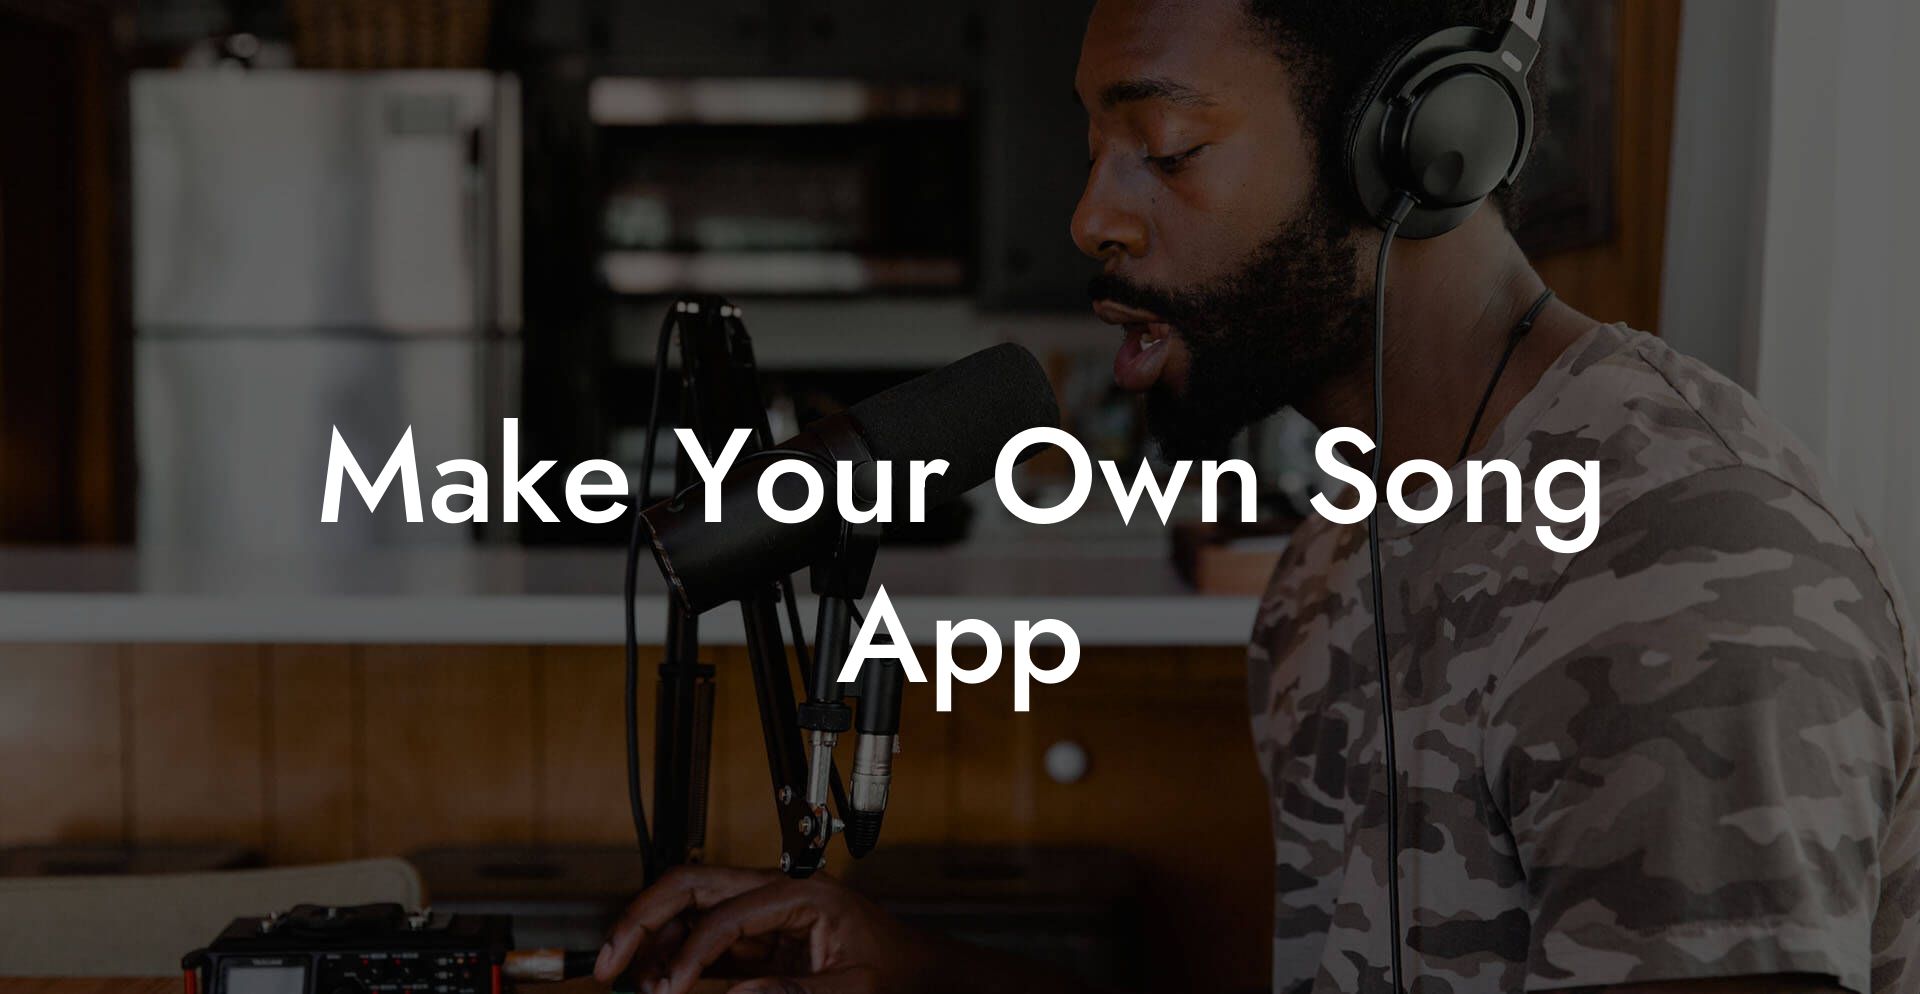 make your own song app lyric assistant